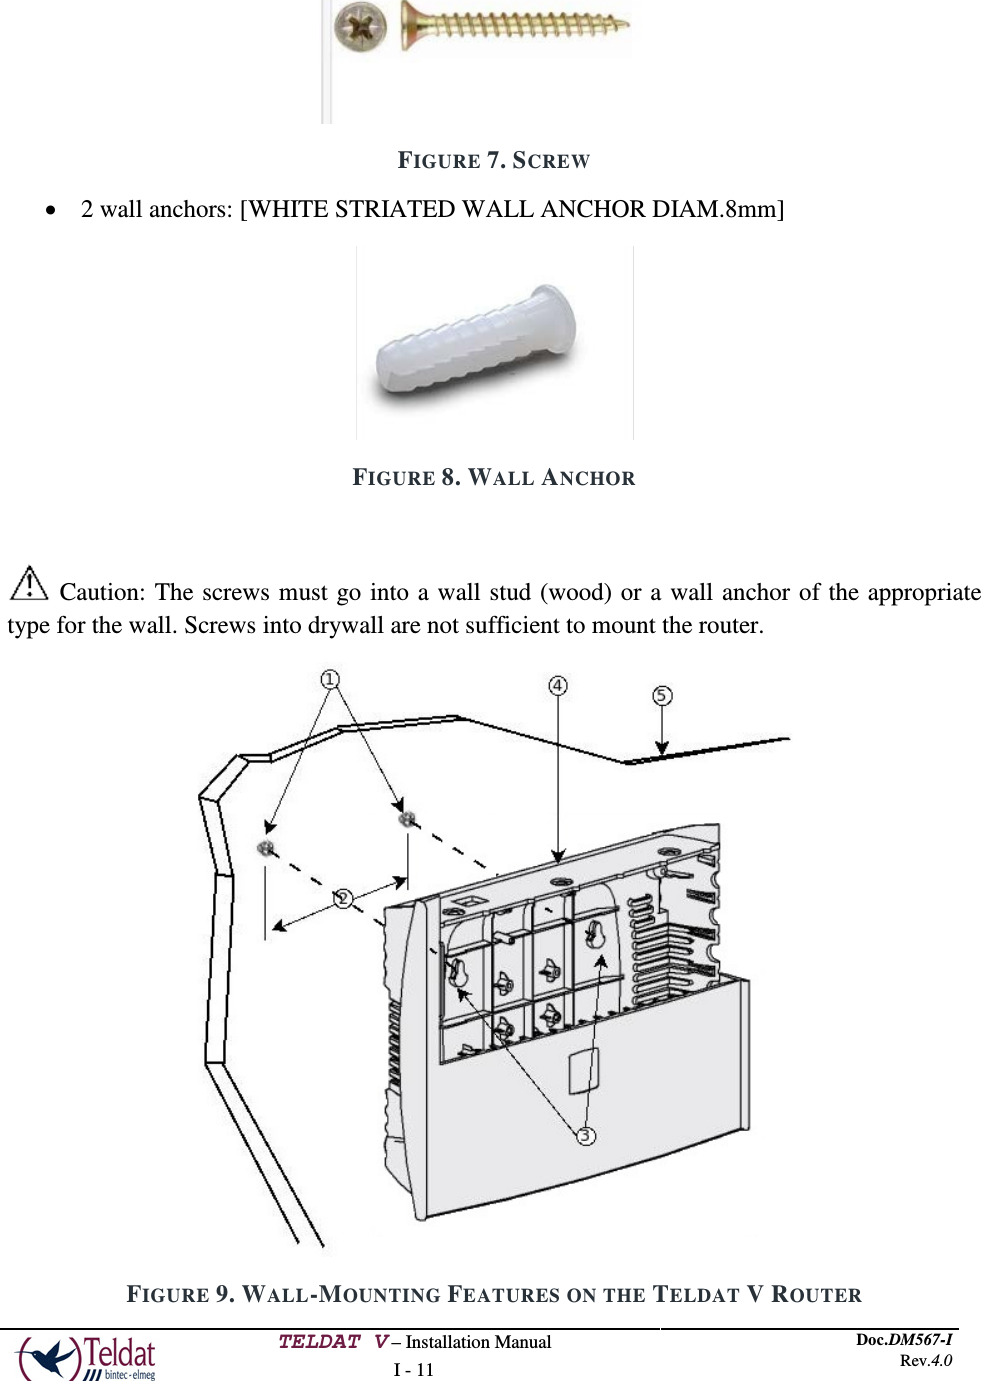  TELDAT V – Installation Manual I - 11 Doc.DM567-I Rev.4.0   FIGURE 7. SCREW • 2 wall anchors: [WHITE STRIATED WALL ANCHOR DIAM.8mm]  FIGURE 8. WALL ANCHOR   Caution: The screws must go into a wall stud (wood) or a wall anchor of the appropriate type for the wall. Screws into drywall are not sufficient to mount the router.  FIGURE 9. WALL-MOUNTING FEATURES ON THE TELDAT V ROUTER 